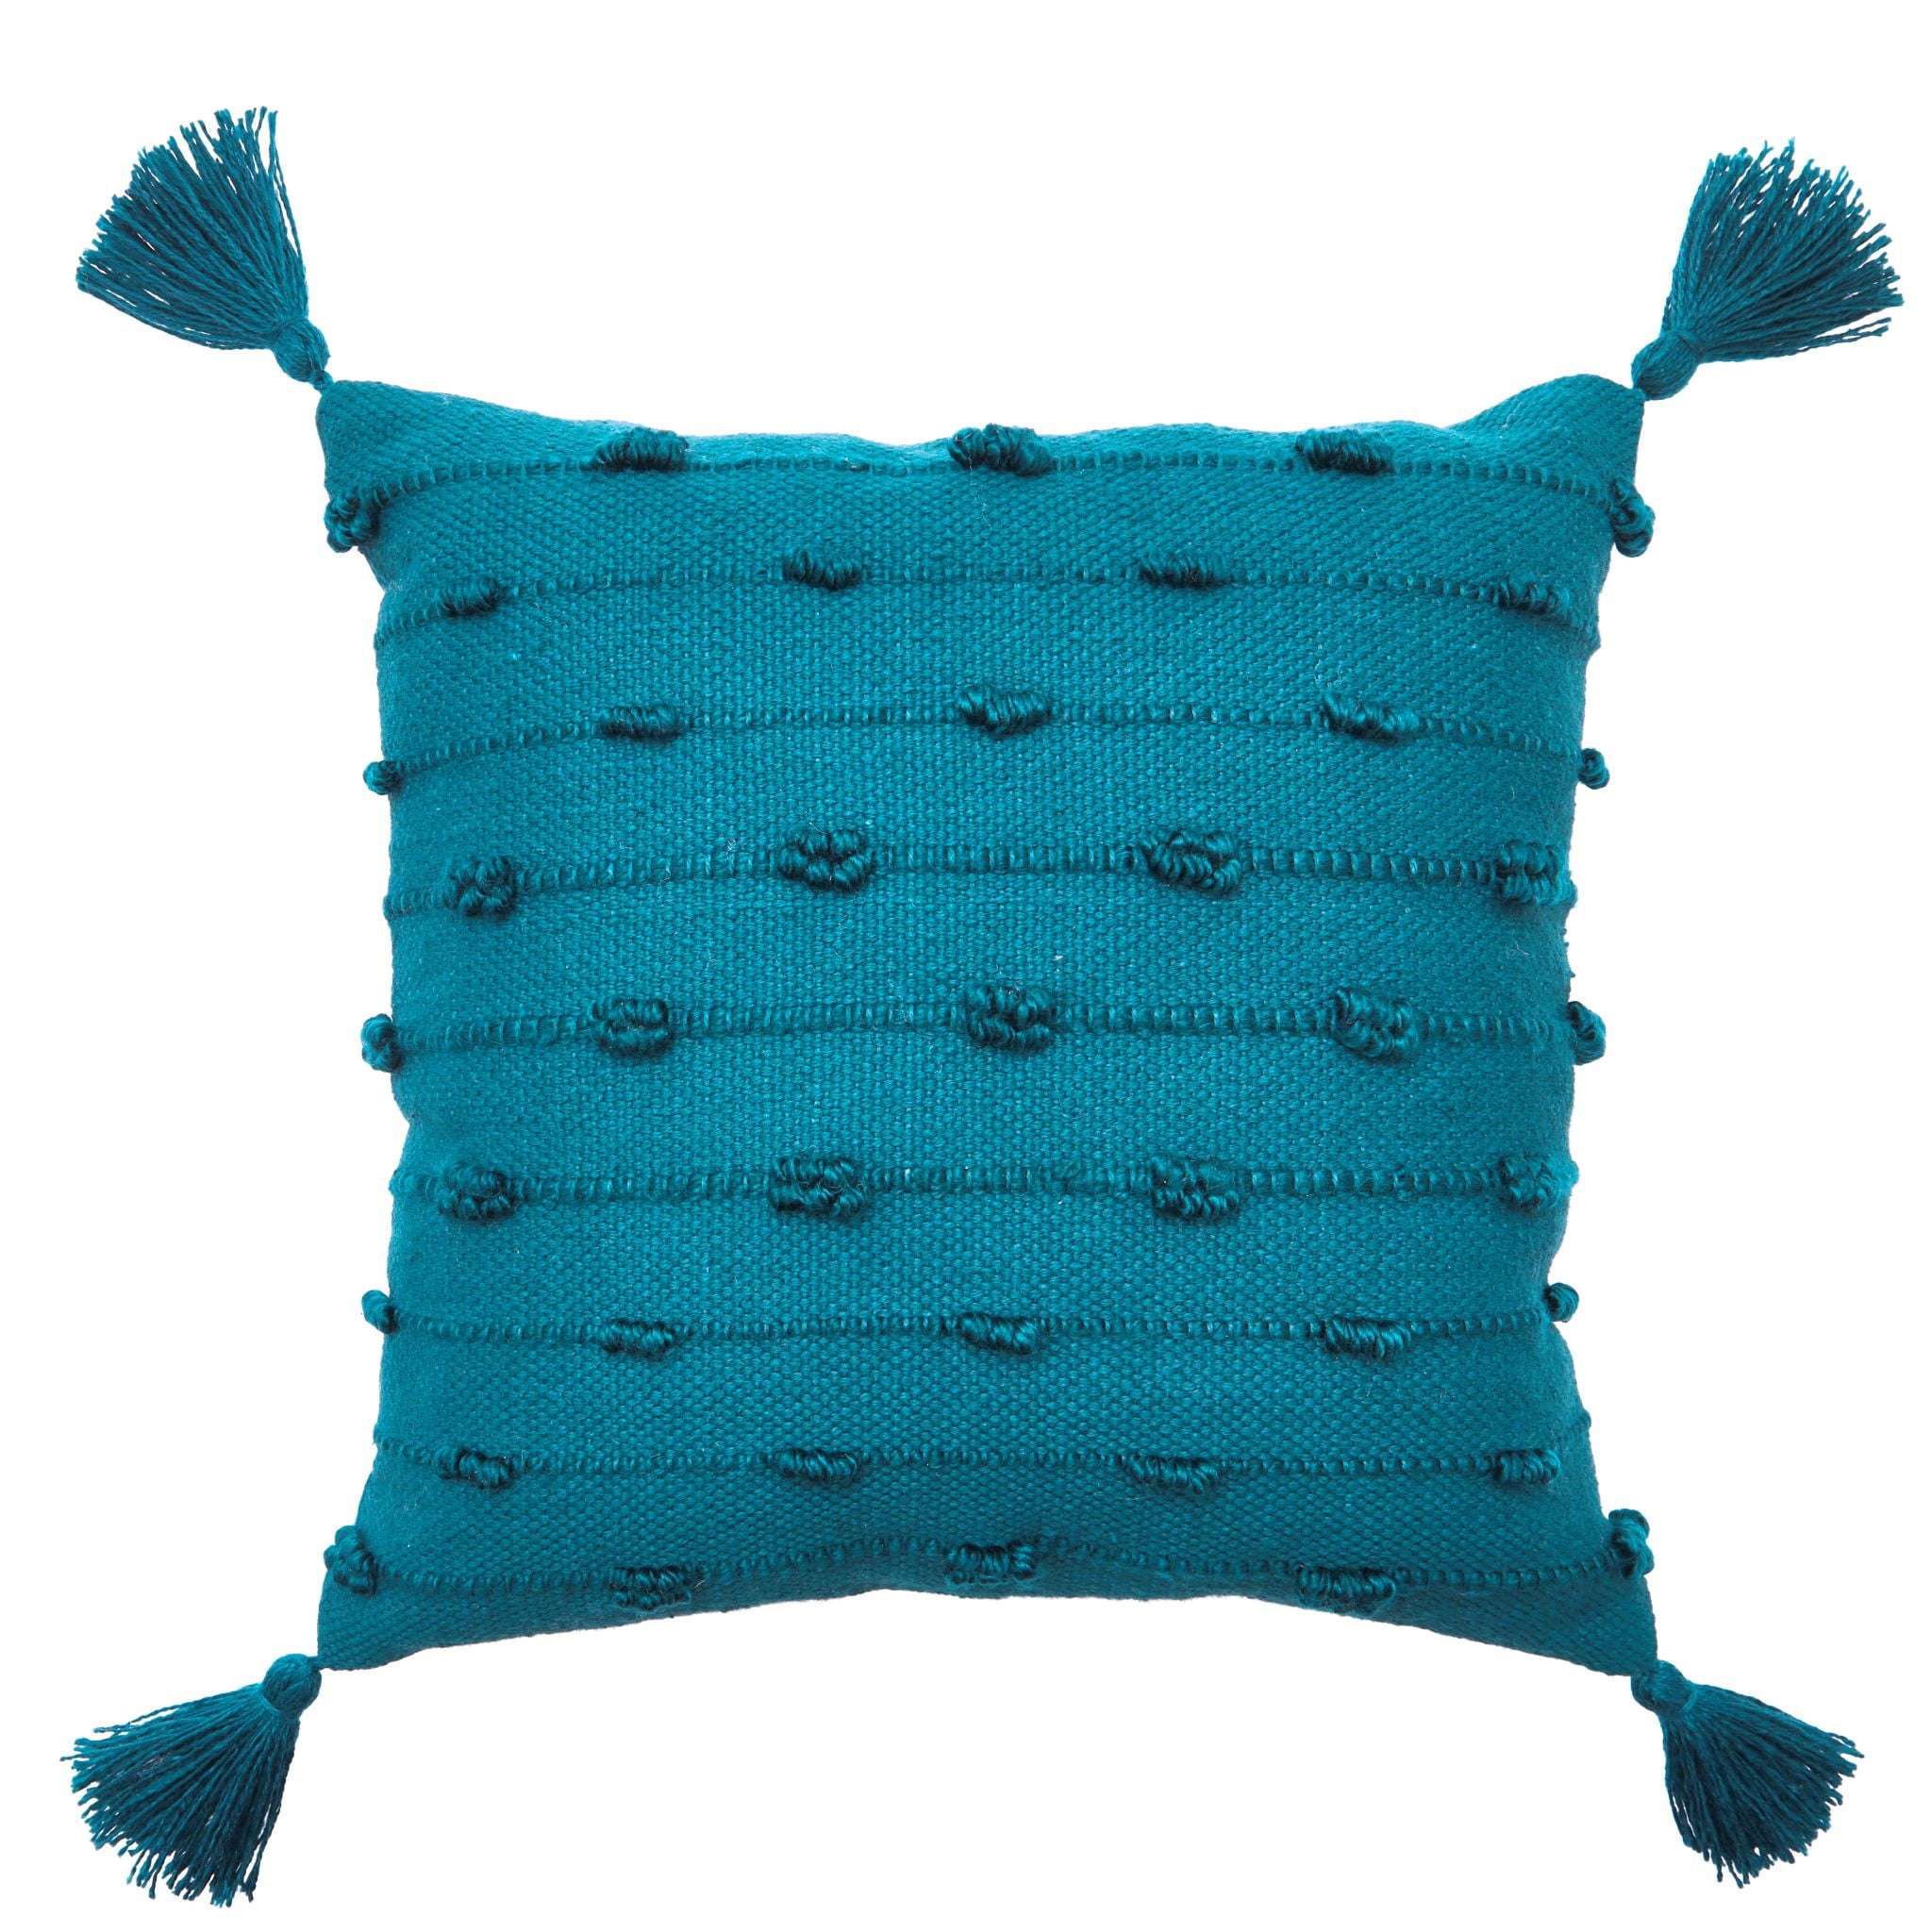 Better Homes & Gardens Knotted Outdoor Throw Pillow, 21' x 21', Teal